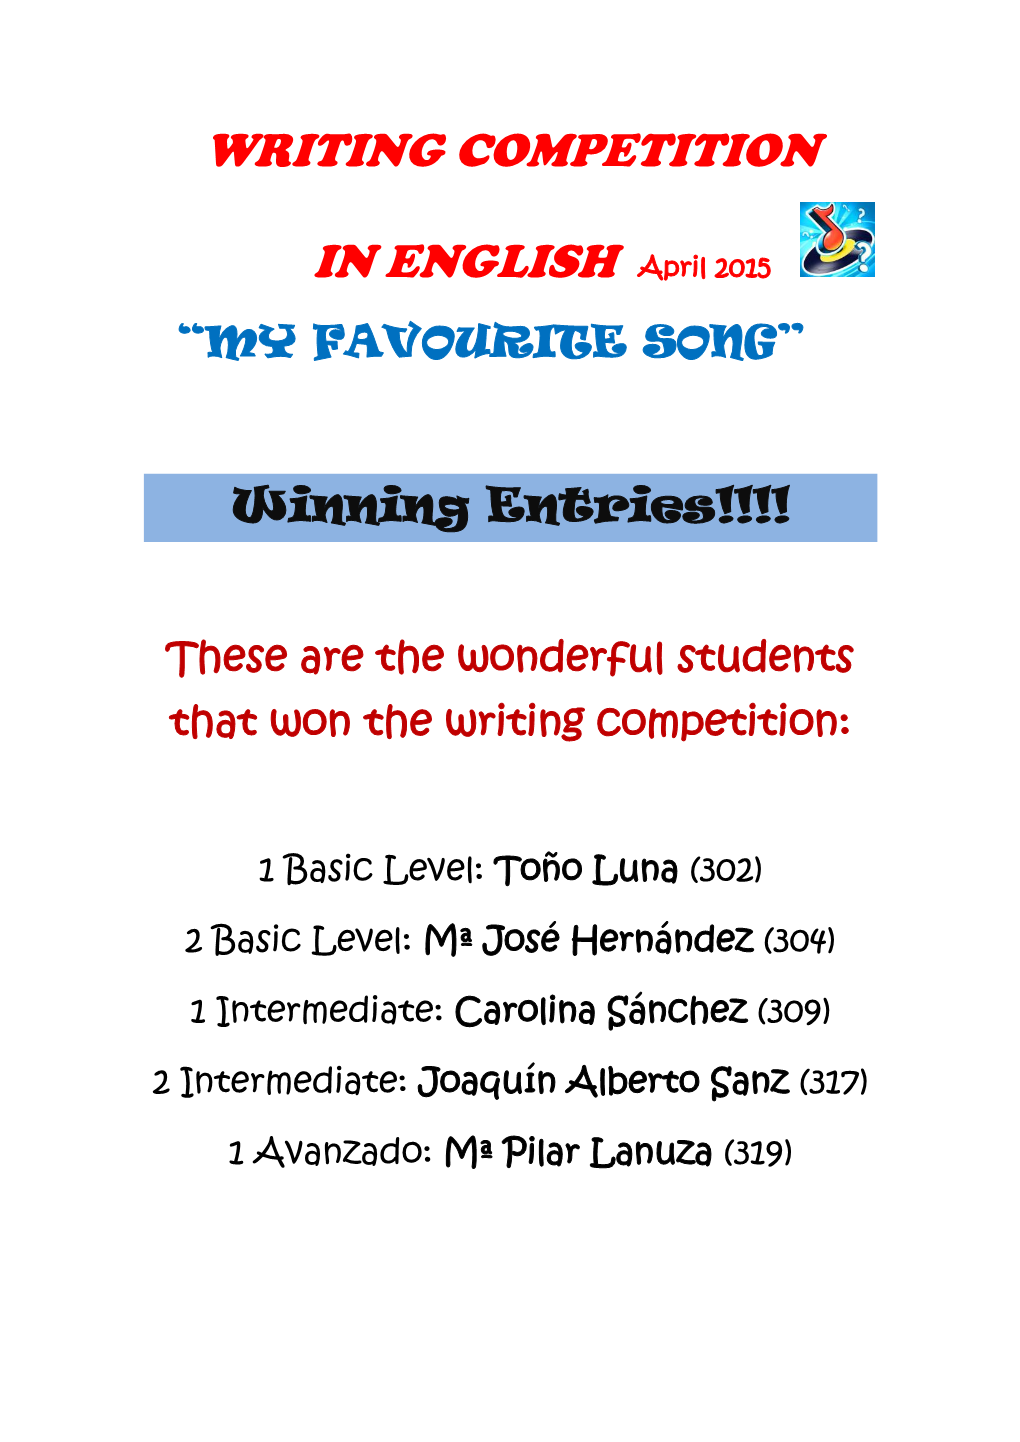 WRITING COMPETITION in ENGLISH April 2015